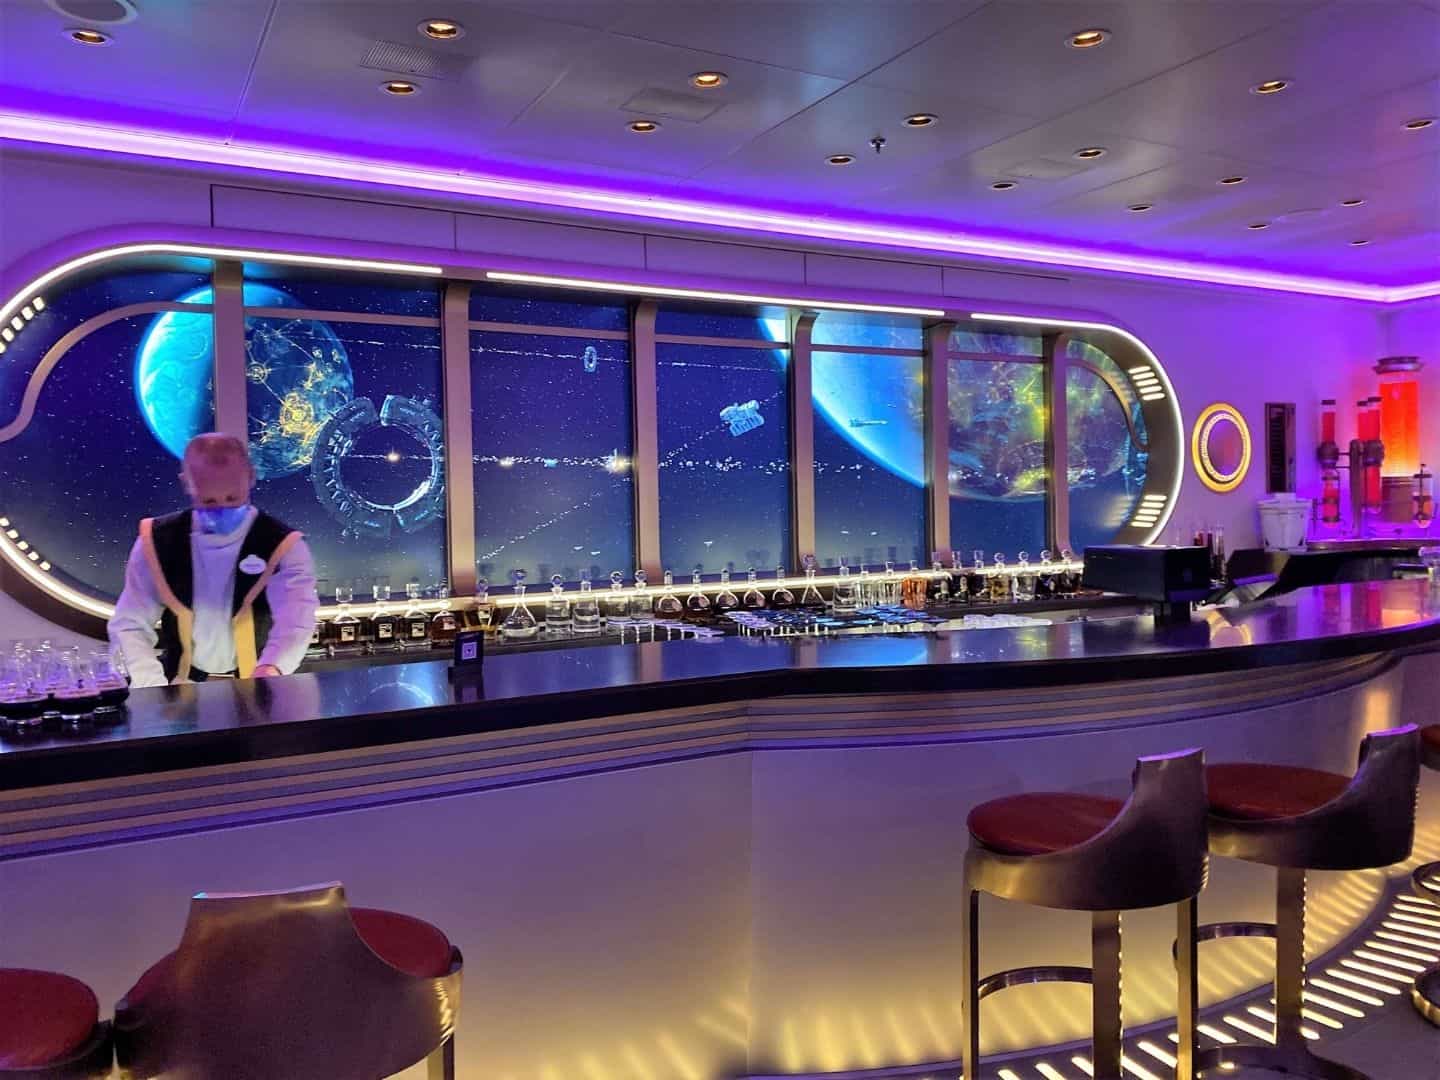 Star Wars Hyperspace Lounge for Adults on Disney Wish - a bartender stands behind an elegant modern looking bar with a curved video monitor behind him that looks like a panoramic window looking out into outer space